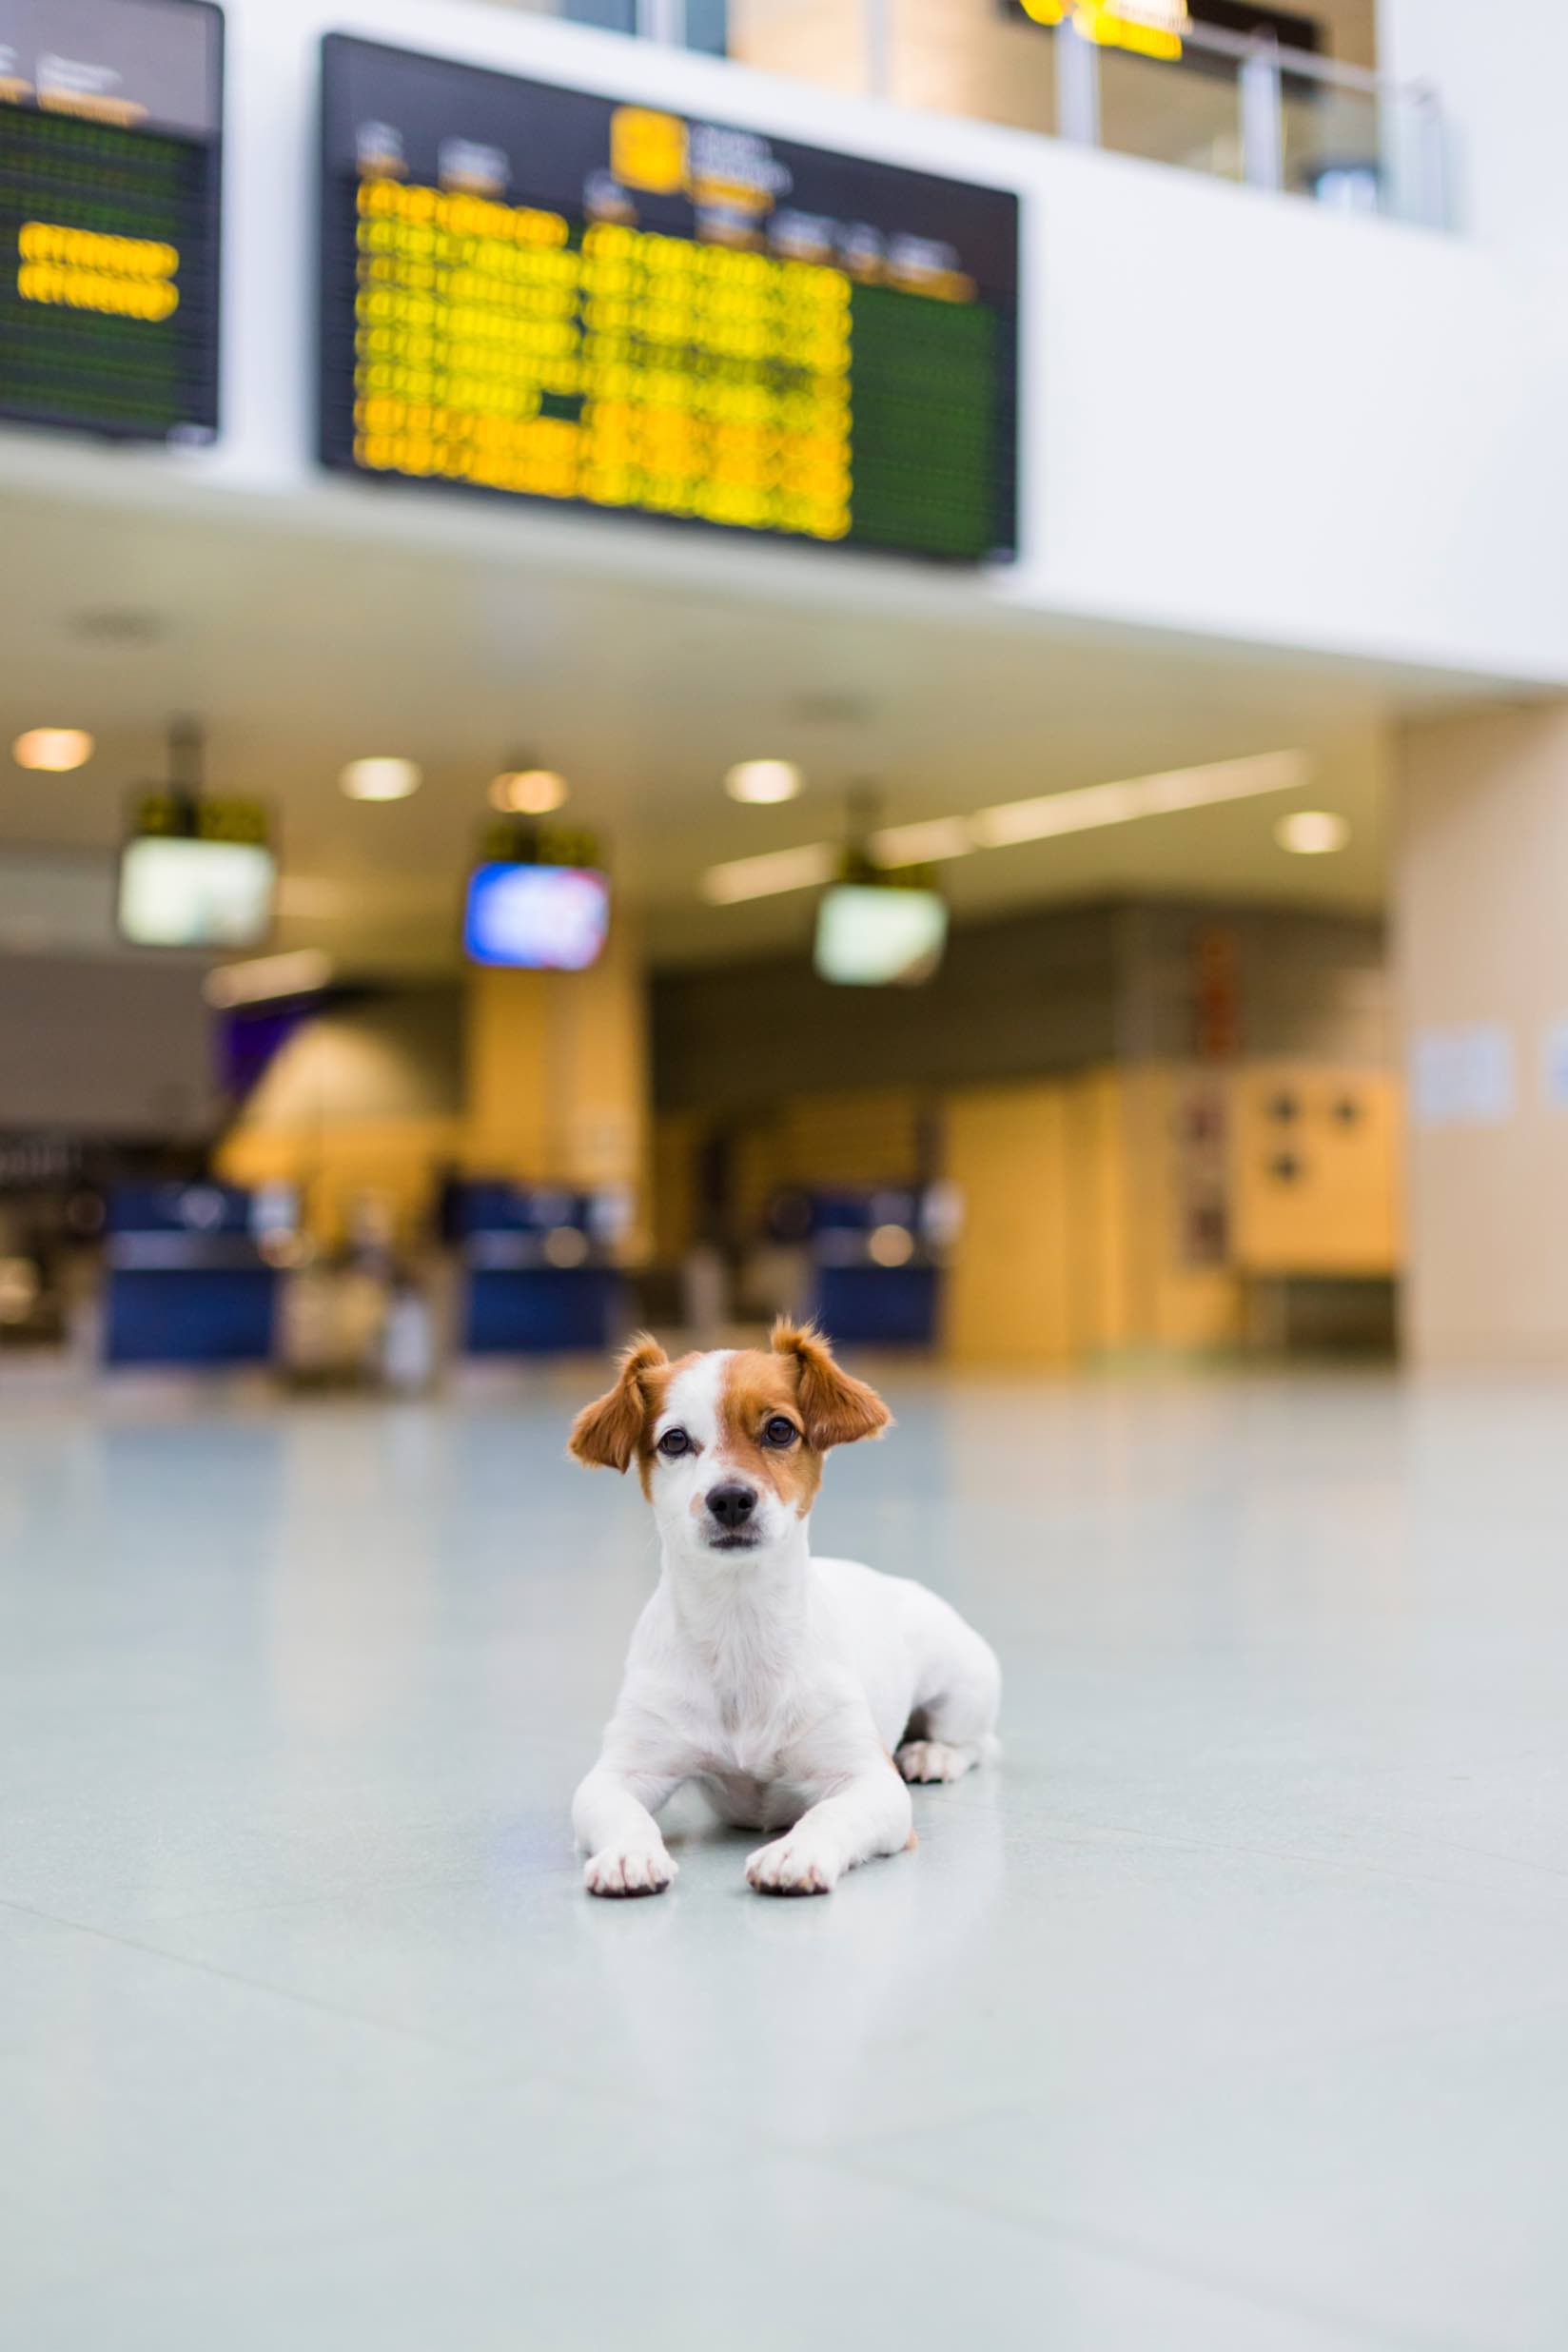 This pup is happy to behave at the airport, especially thanks to training from Dog Training Elite in Pensacola.